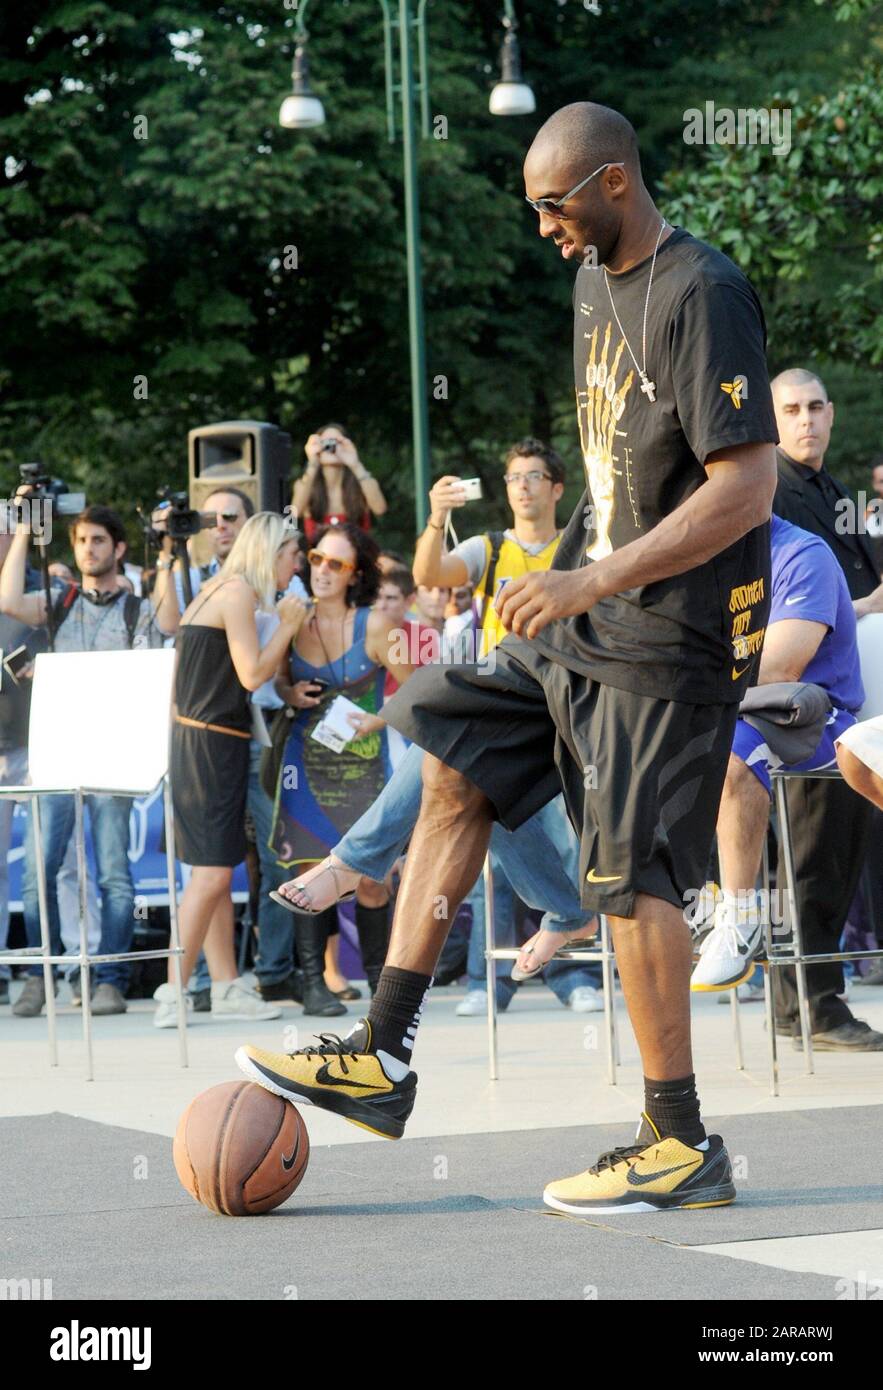 KOBE BRYANT NIKE DAY AT SEMPIONE PARK; IN THE PHOTO KOBE BRYANT; IN THE  PHOTO KOBE BRYANT (Nicola Marfisi/Fotogramma/Fotogramma, MILAN -  2011-09-28) ps the photo can be used in respect of the